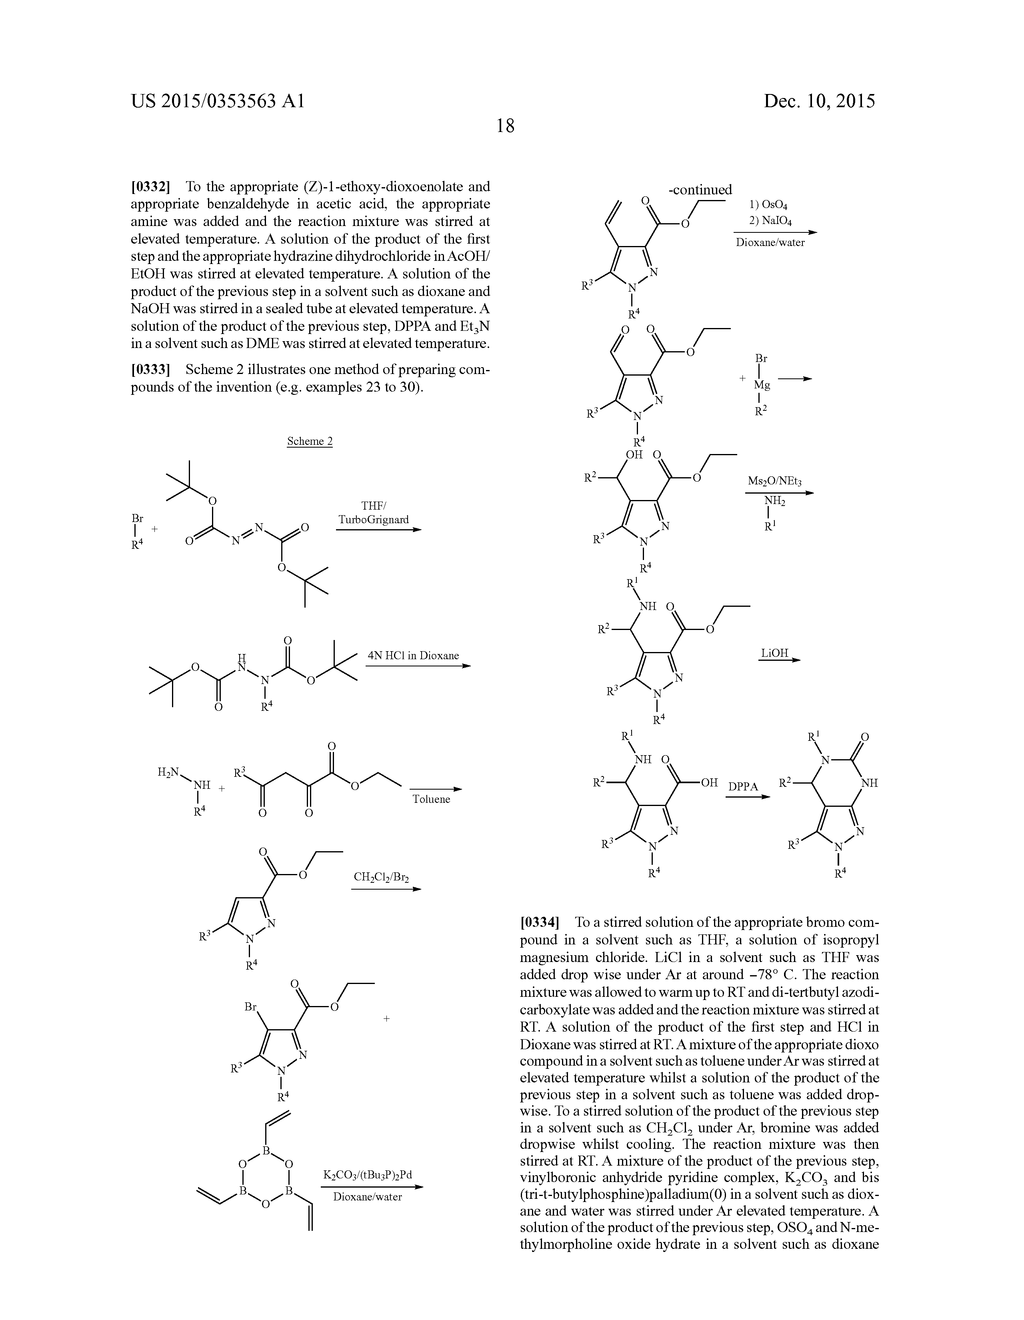 PYRAZOLO[3,4-D]PYRIMIDINONE COMPOUNDS AS INHIBITORS OF THE P53/MDM2     INTERACTION - diagram, schematic, and image 19